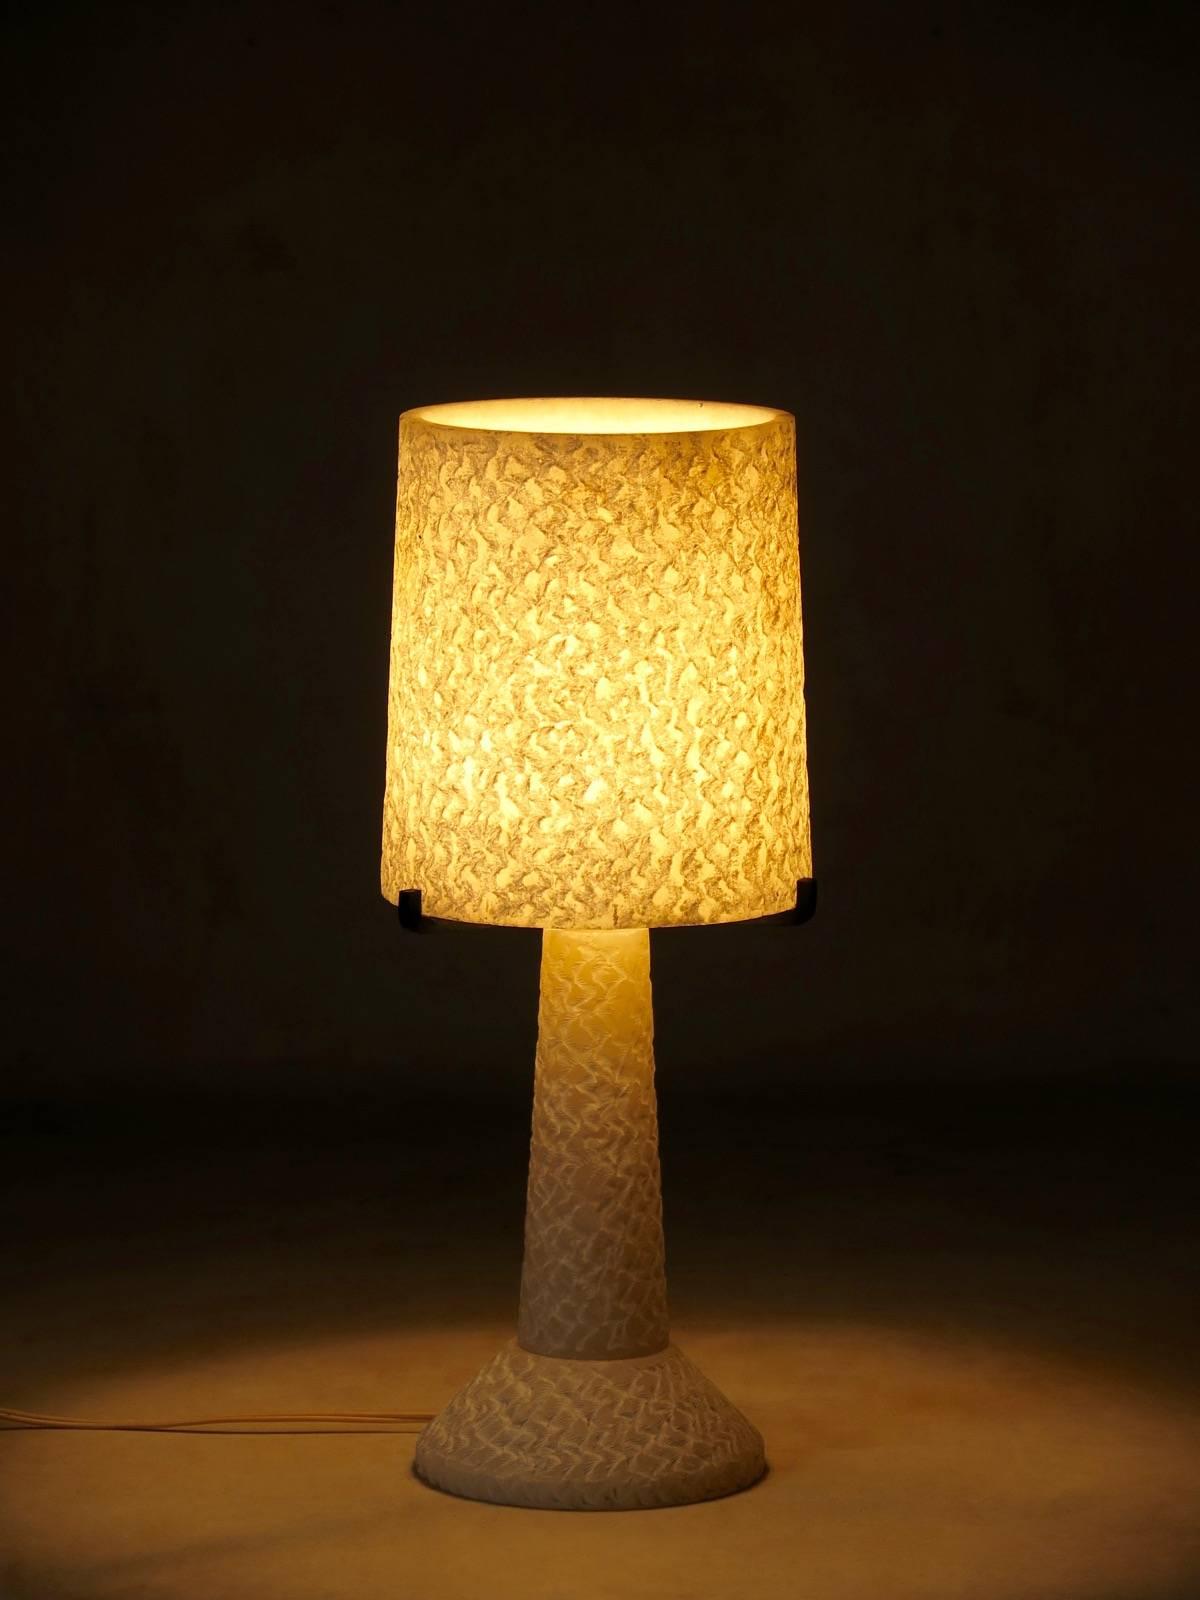 Very lovely alabaster lamp with a heavily textured finish, of elegant, minimalist design. Gives off a very appealing, warm glow when lit.